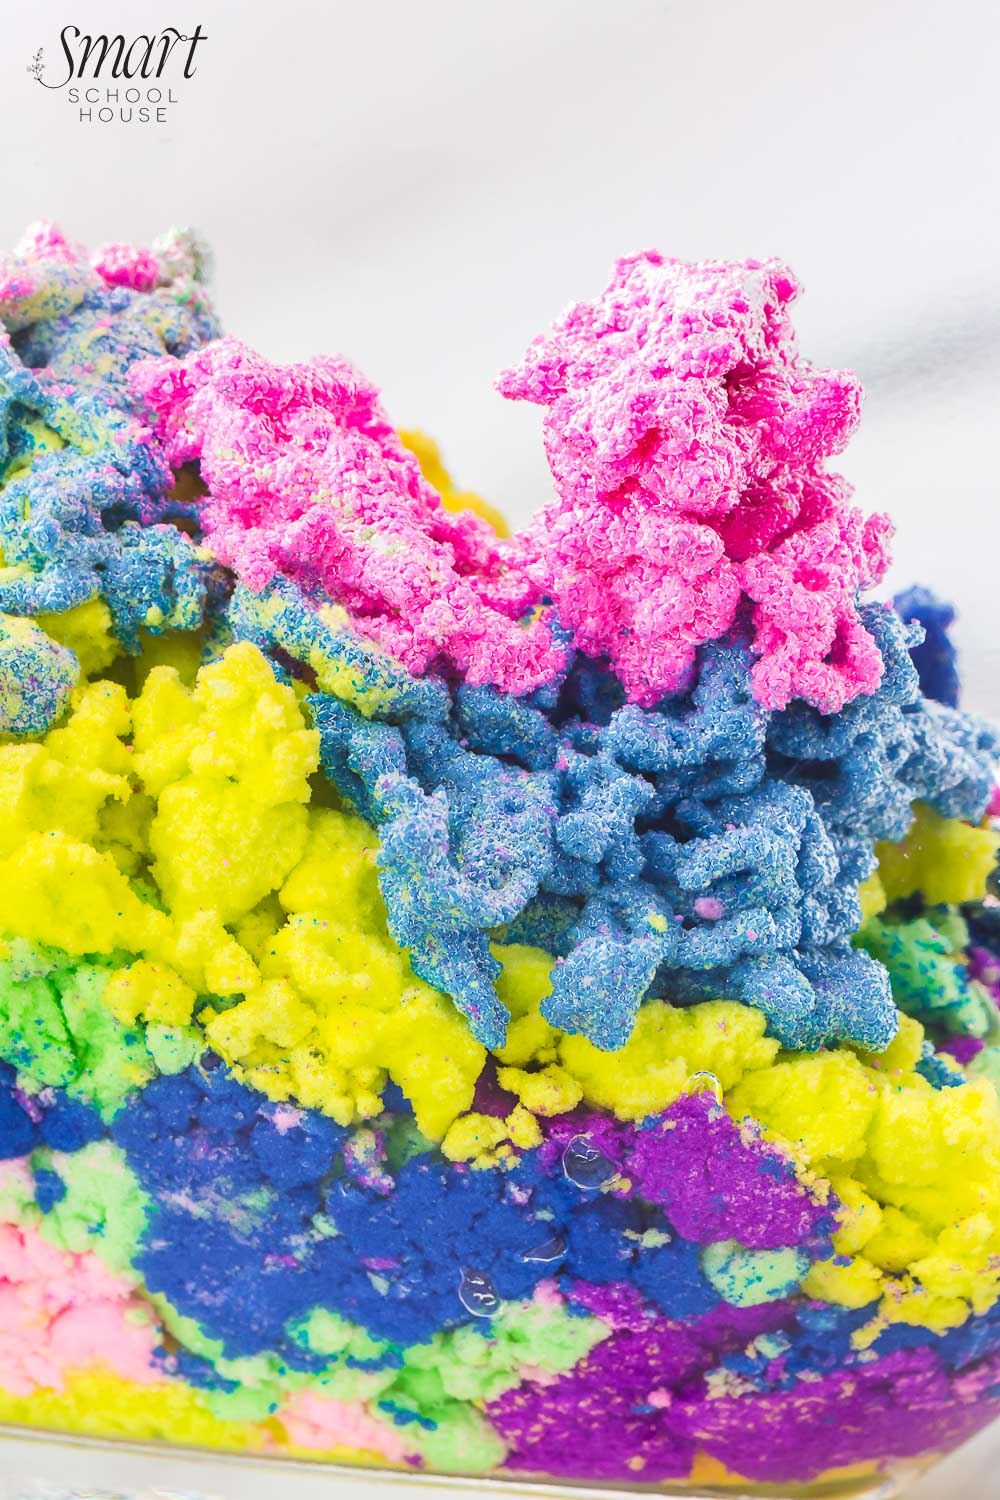 How to make Magic Sand that stays dry in the water! Also known as Aqua Sand, this fun and colorful waterproof sand is poured into water, creating a coral-like appearance that can be used over and over again! 